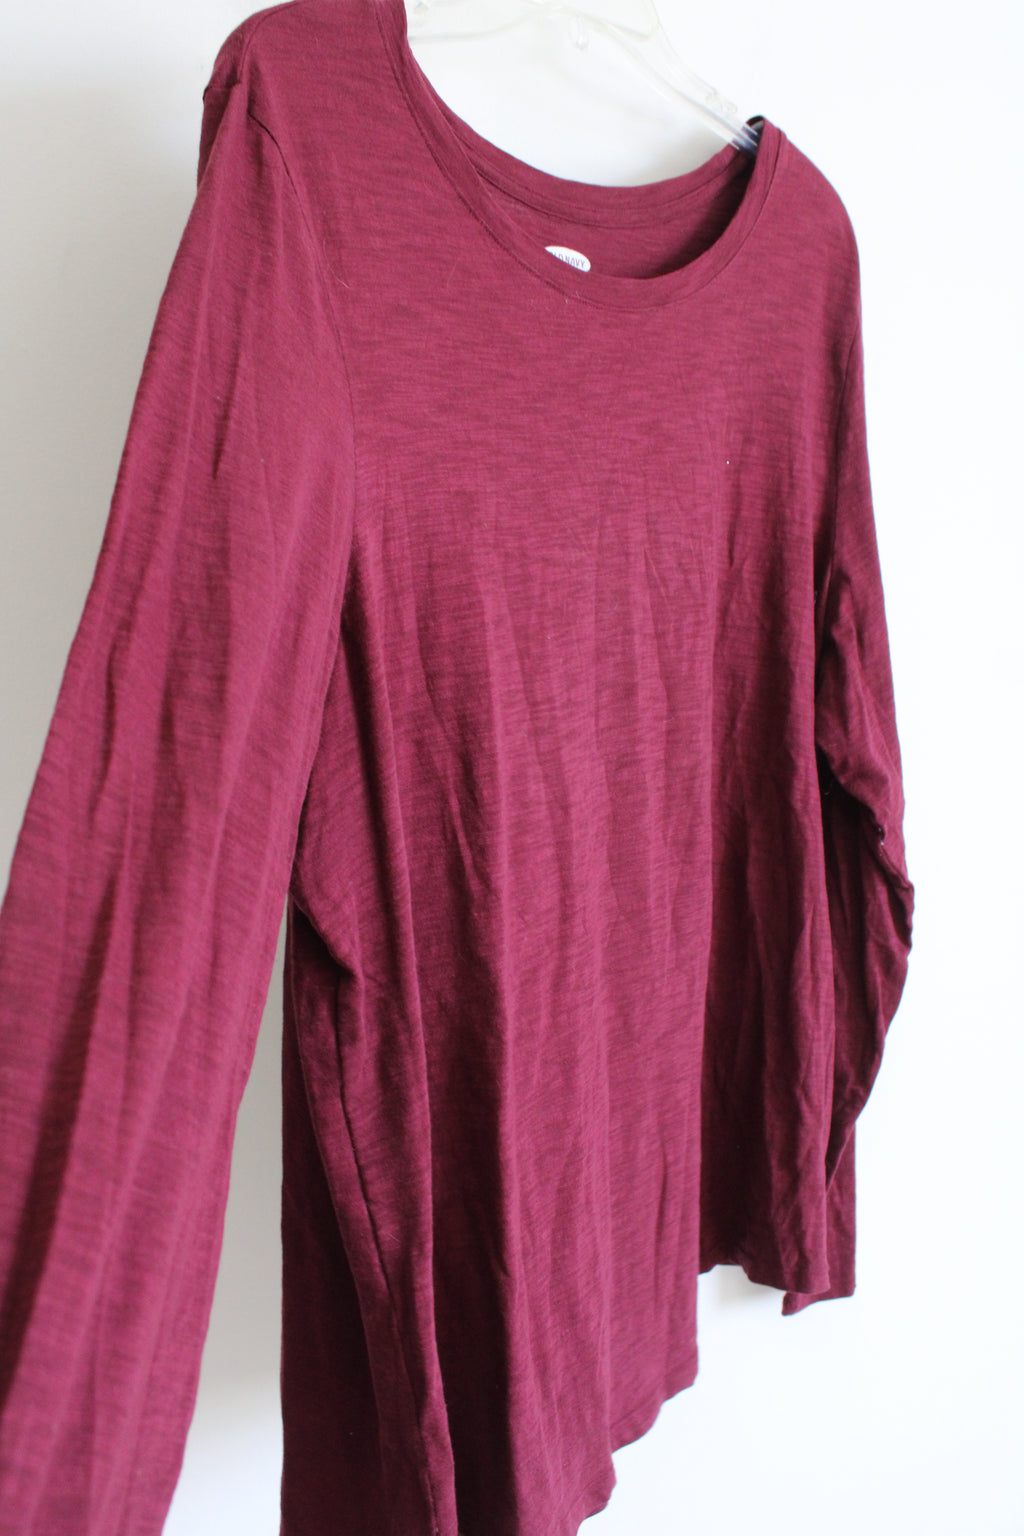 Old Navy Solid Maroon Long Sleeved Top | XL